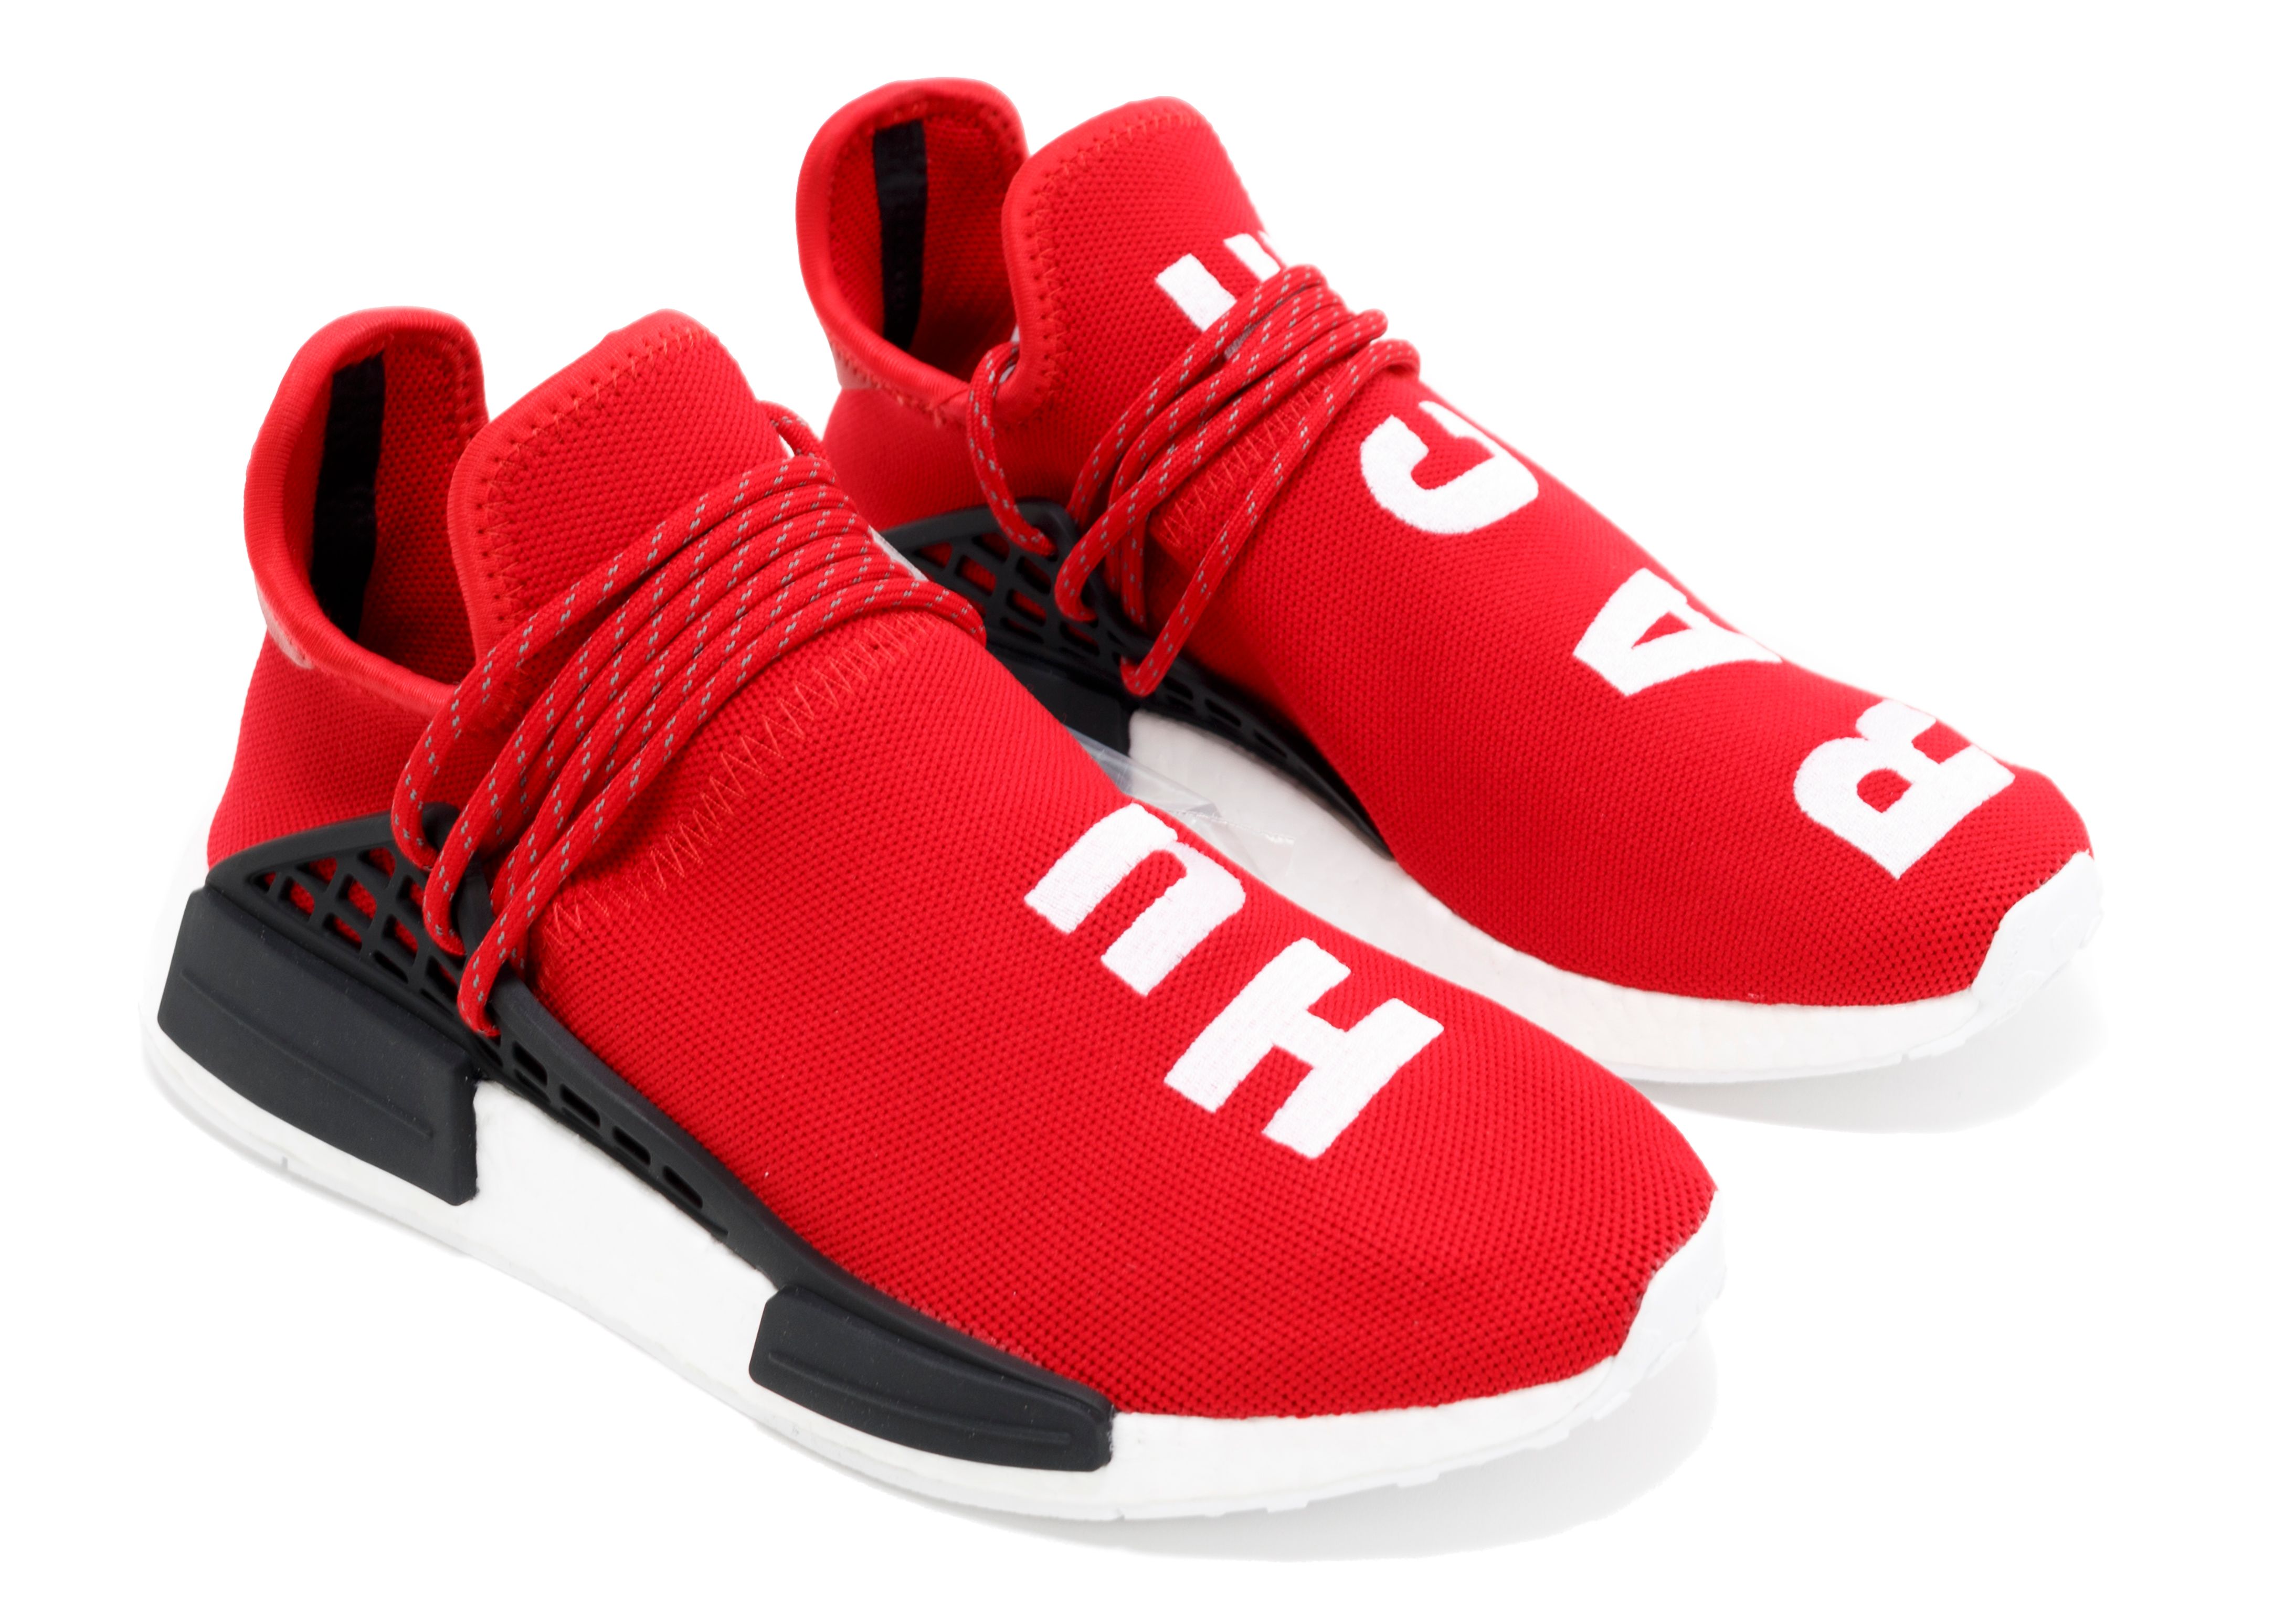 adidas pharrell red shoes